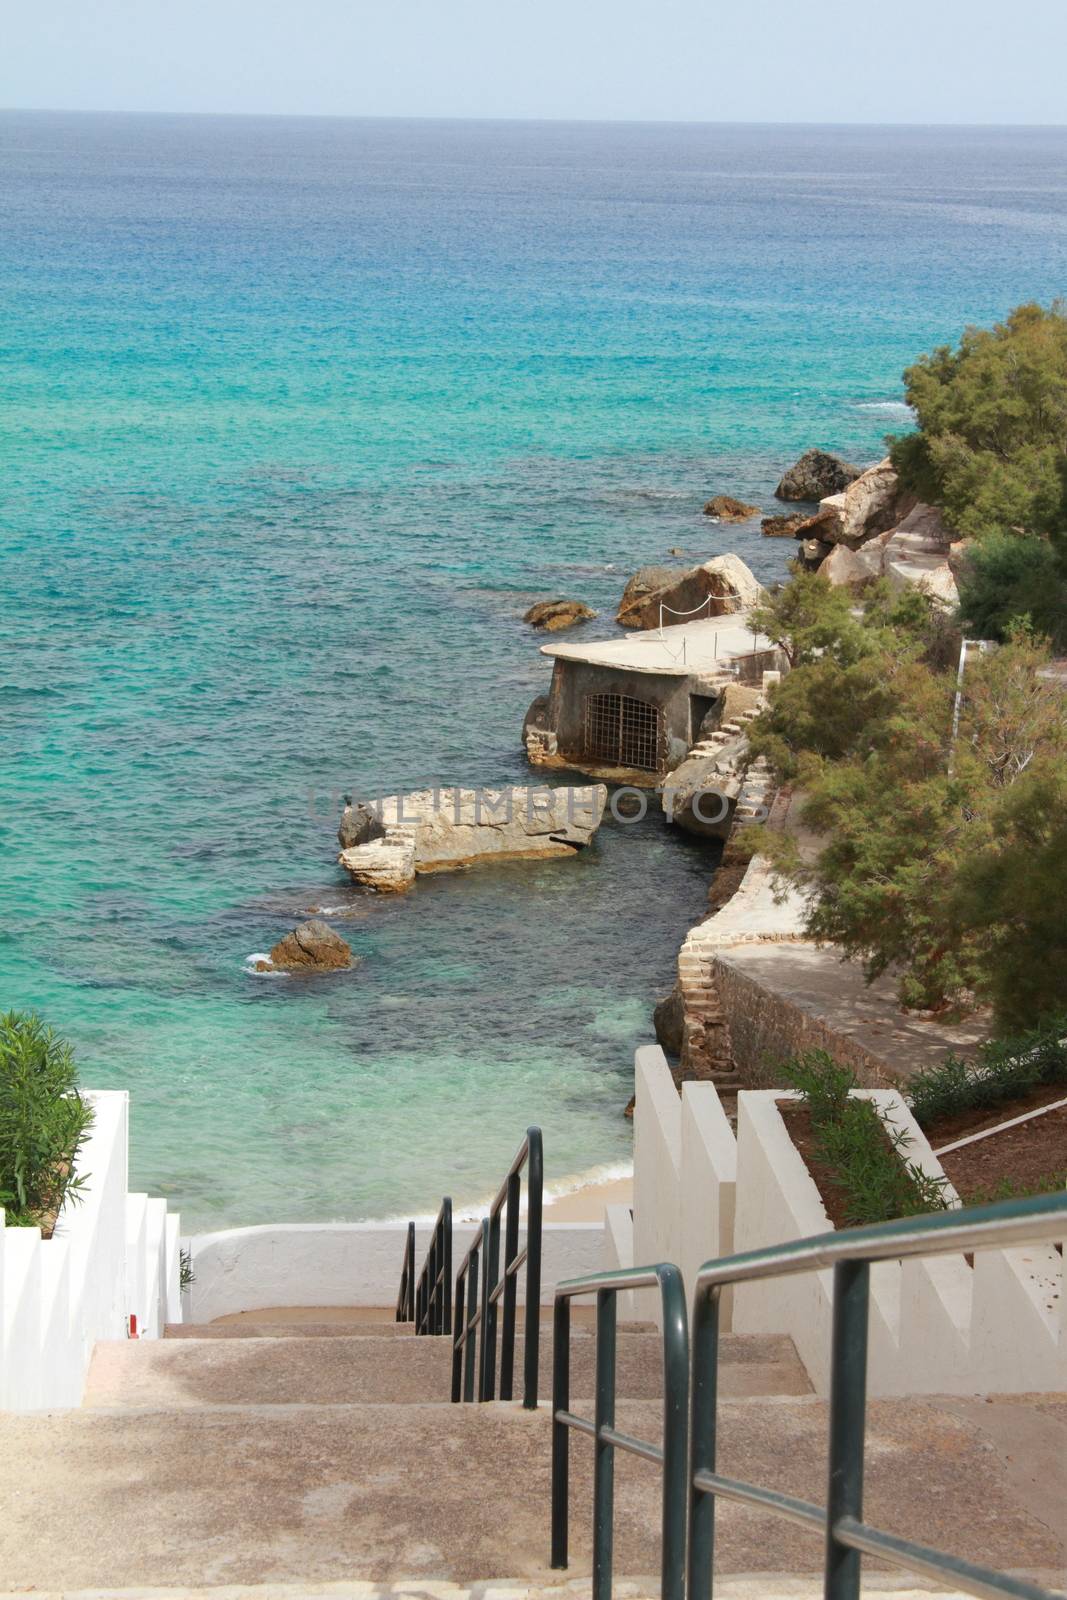 Steps leading down to Cala San Vincente by mitzy